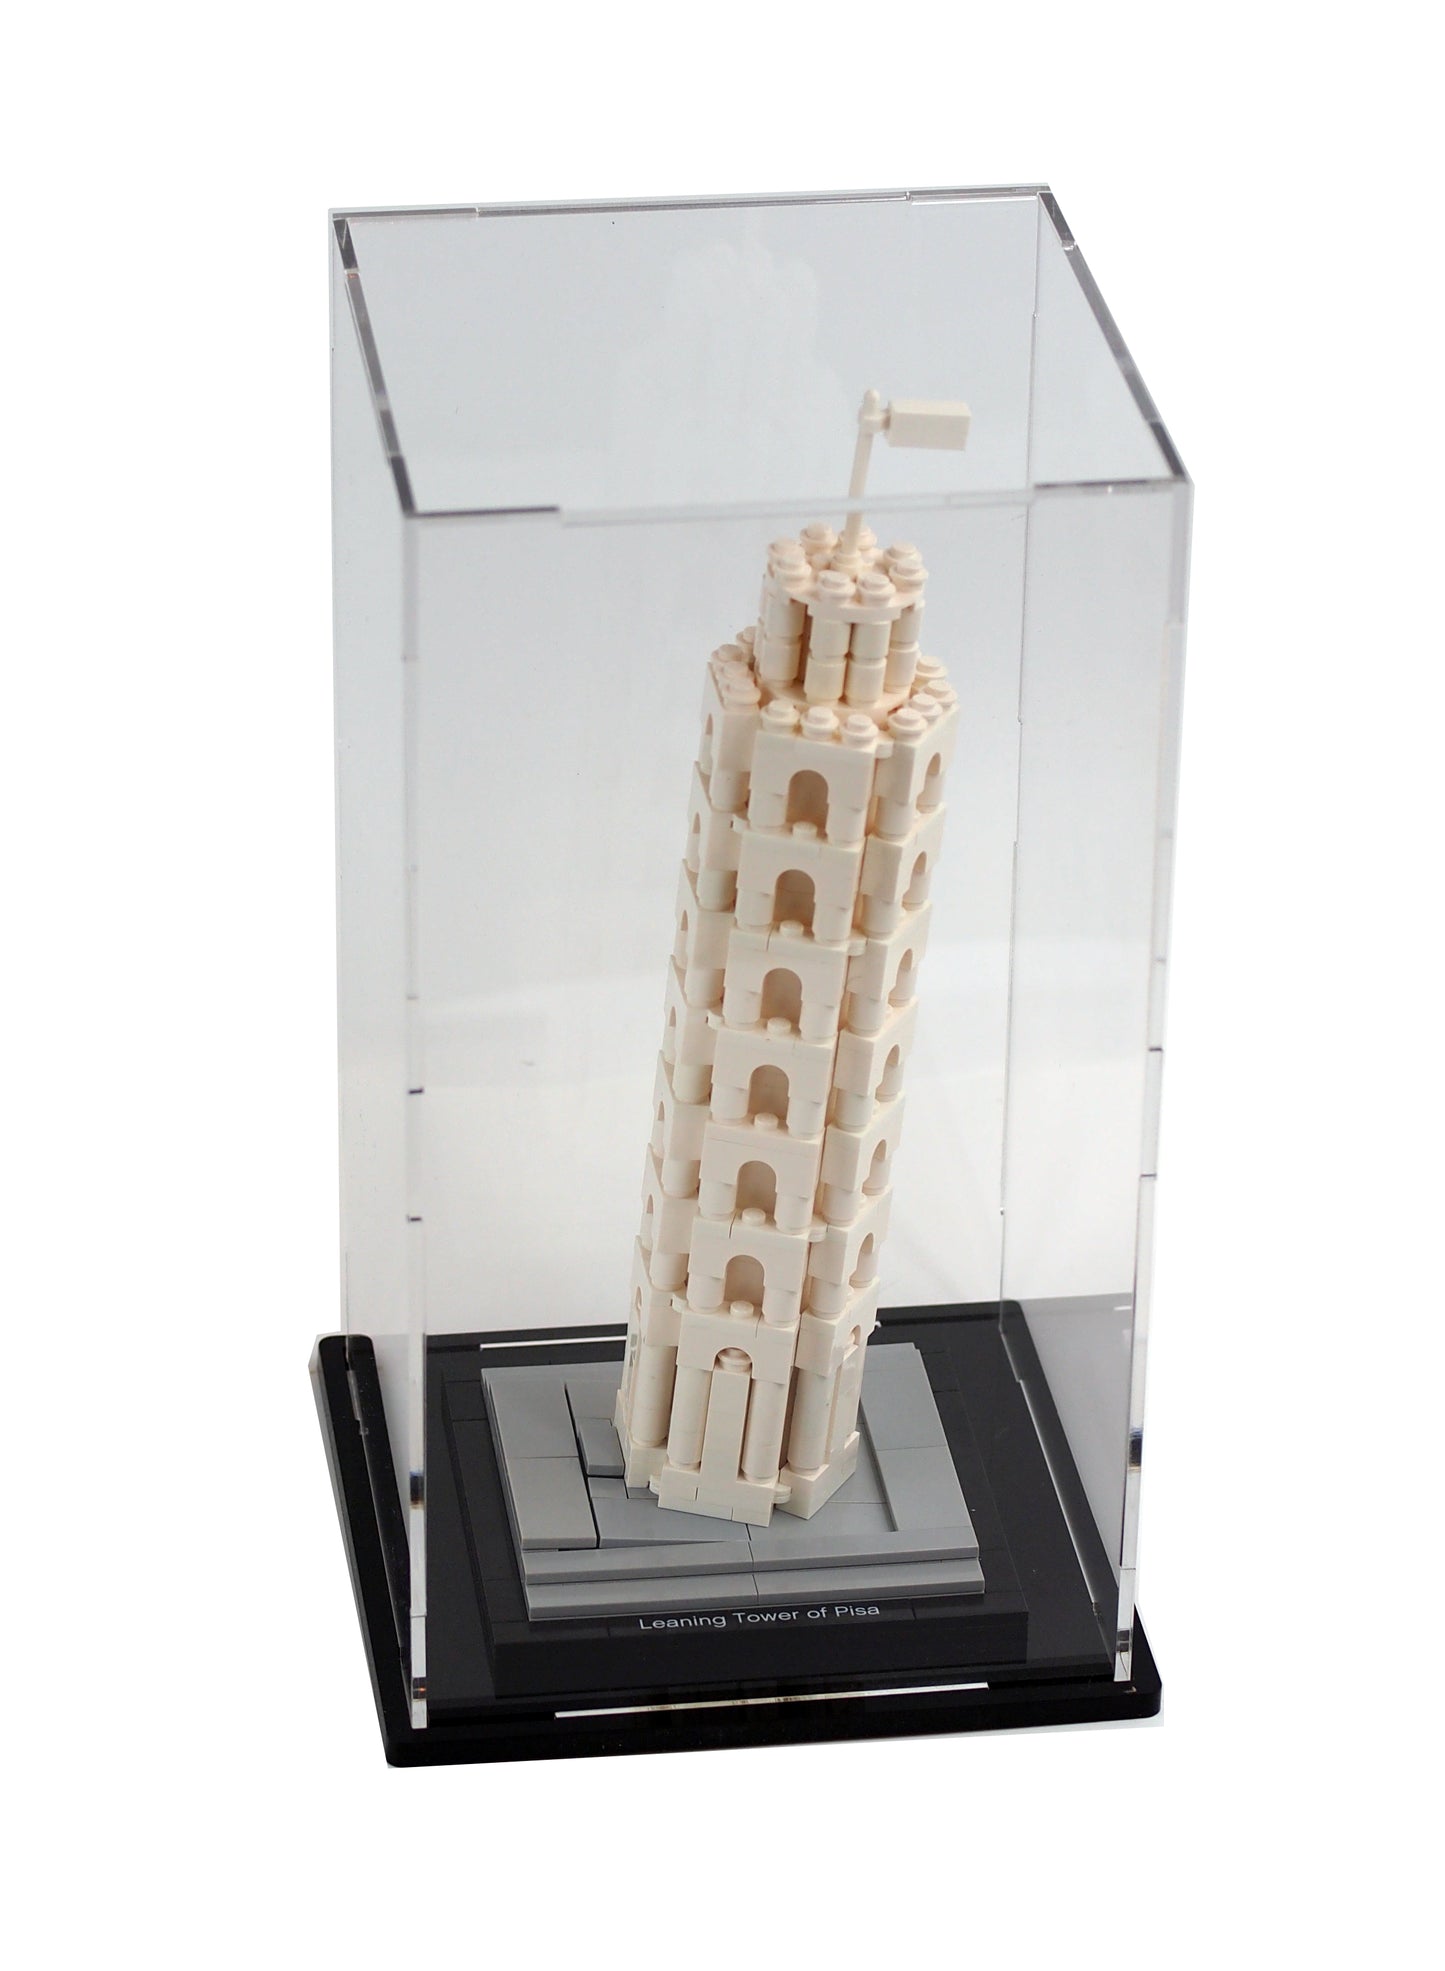 Display Case for LEGO Architecture Leaning Tower of Pisa (21015) Set